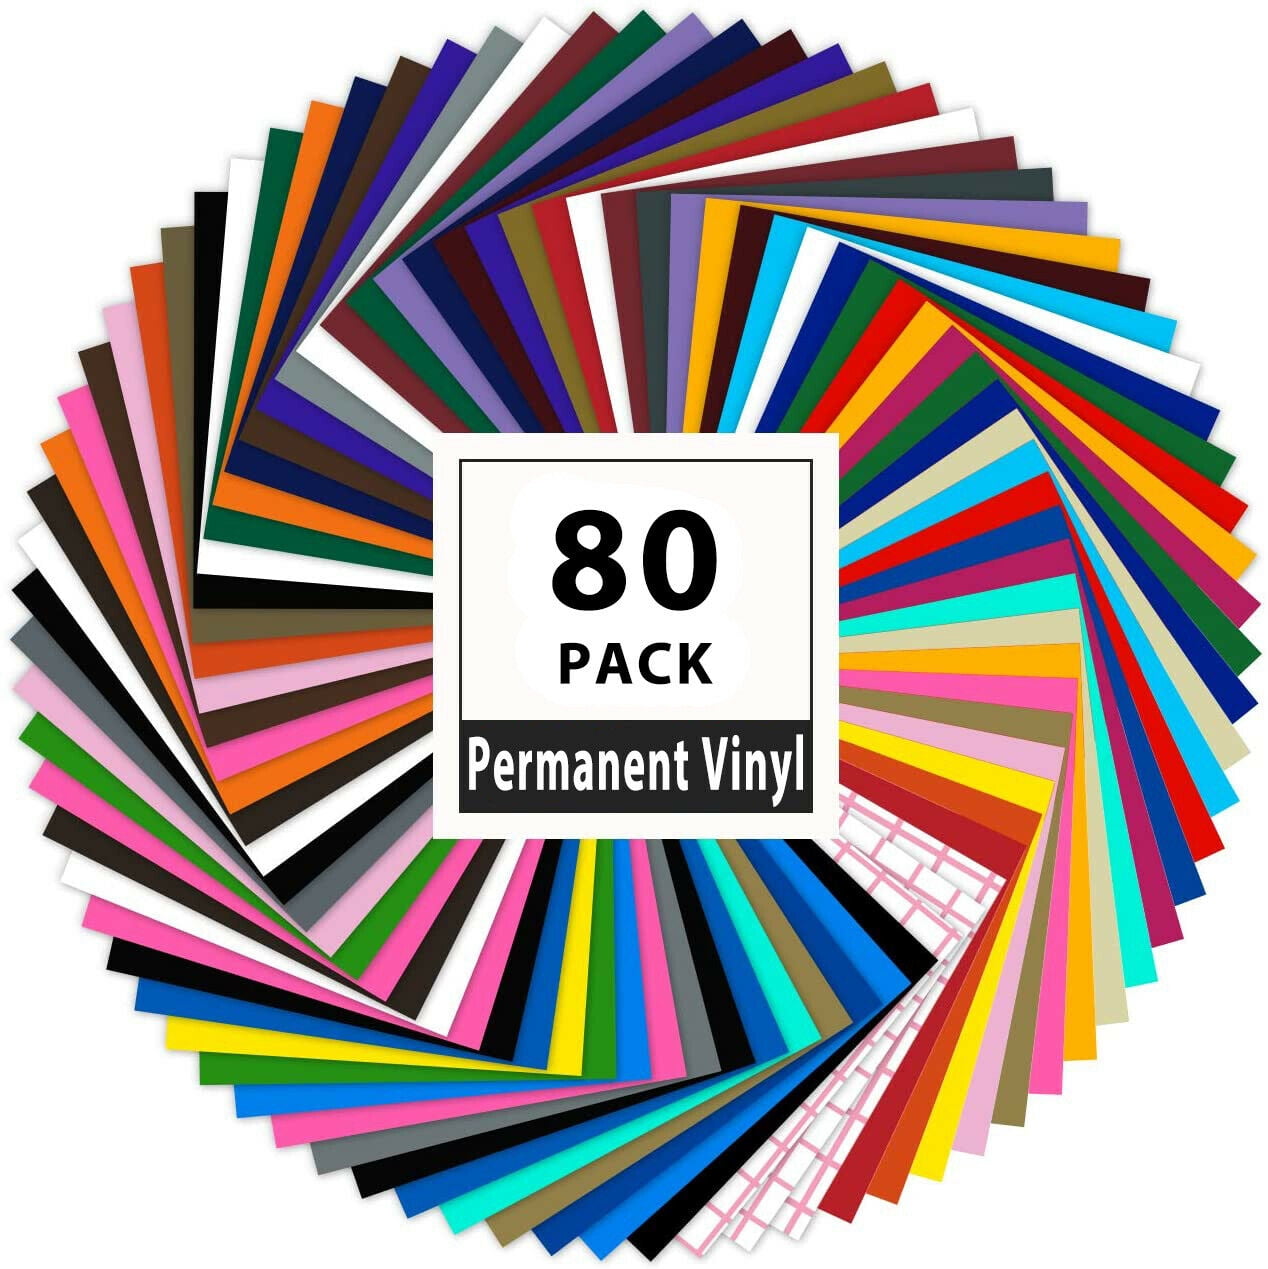 Permanent Vinyl Bundle for Cricut - 70 Pack Self Adhesive Vinyl Sheets  (65+5 Holo Colors 12x12) for Home Decal, Mug, Cup, Windows, Ceramics,  Holiday